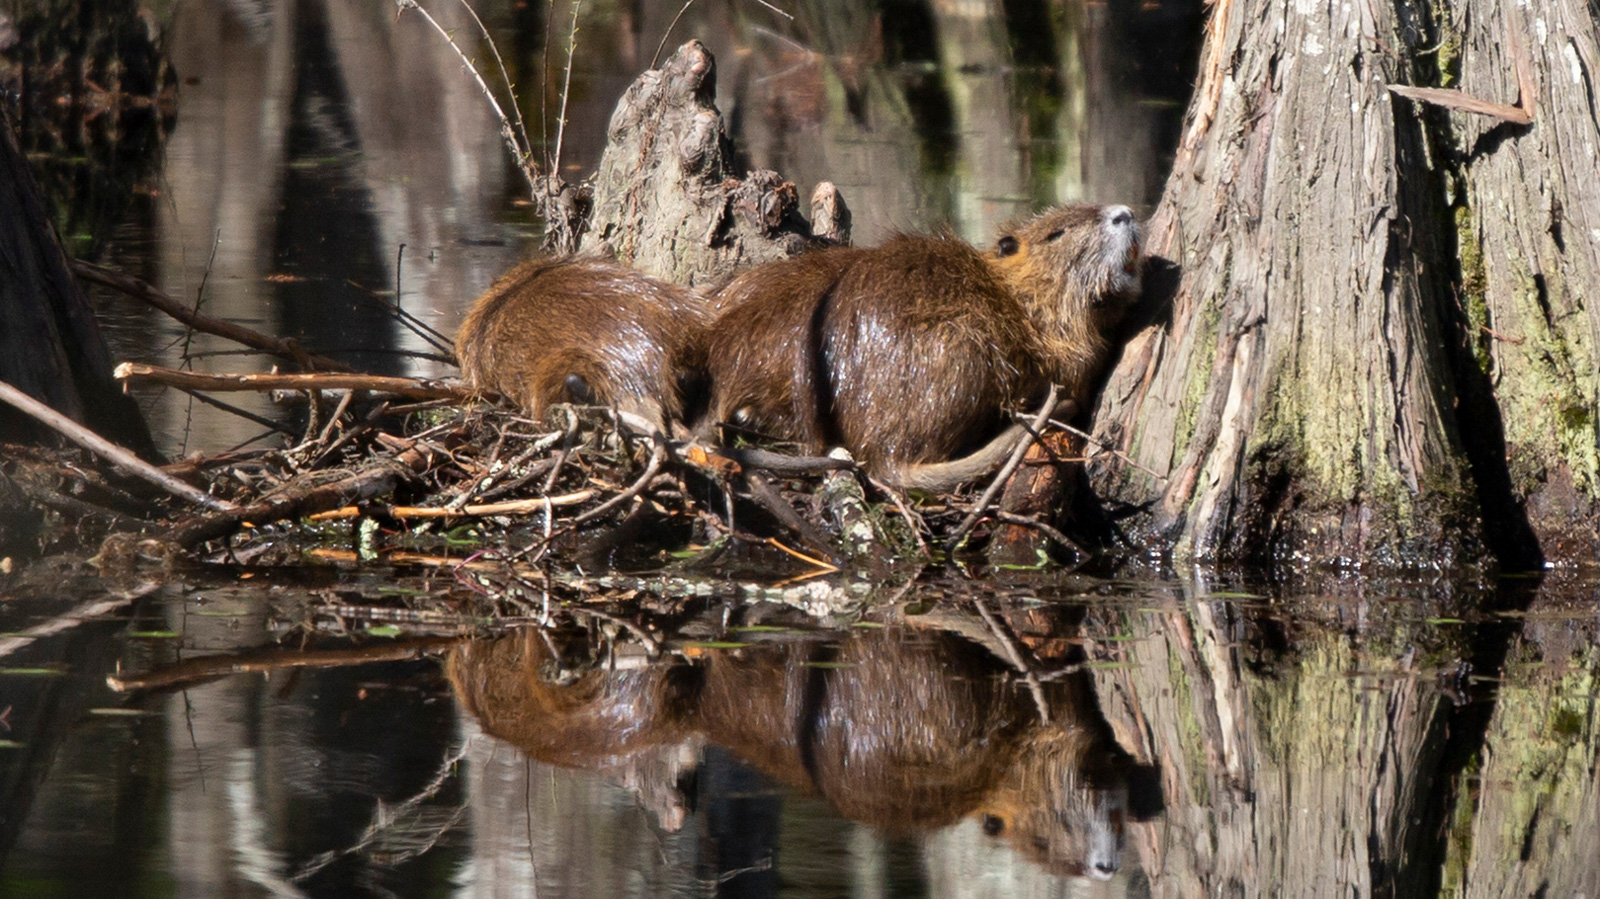 Nutria lying near water with their reflections